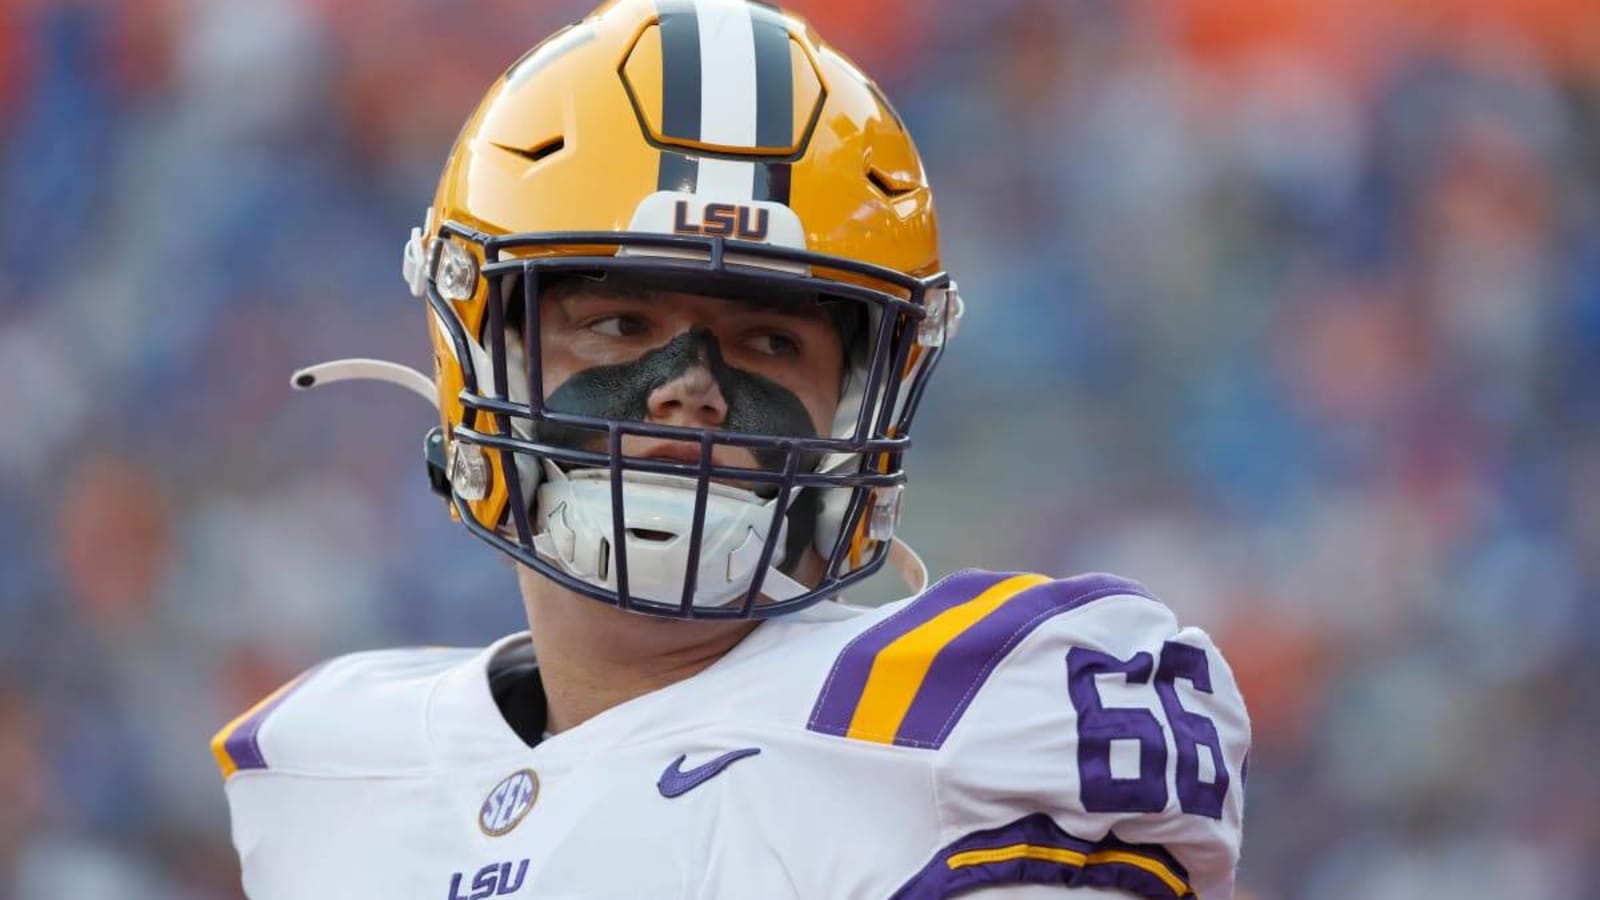 Watch: LSU OL Will Campbell Stars in NIL Commercial